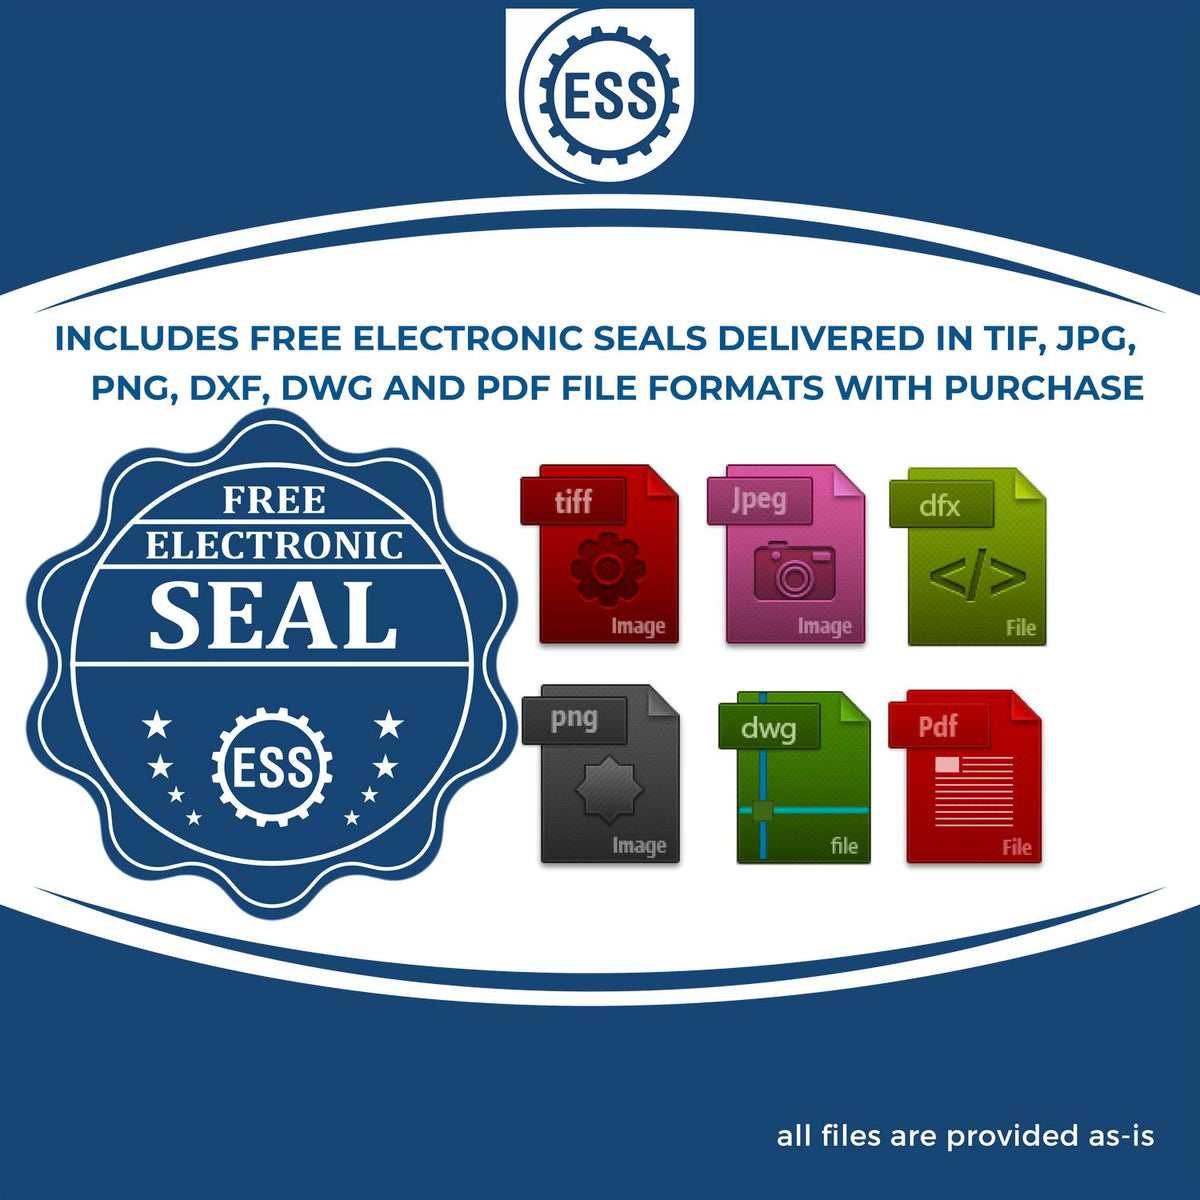 An infographic for the free electronic seal for the Hybrid Virginia Architect Seal illustrating the different file type icons such as DXF, DWG, TIF, JPG and PNG.